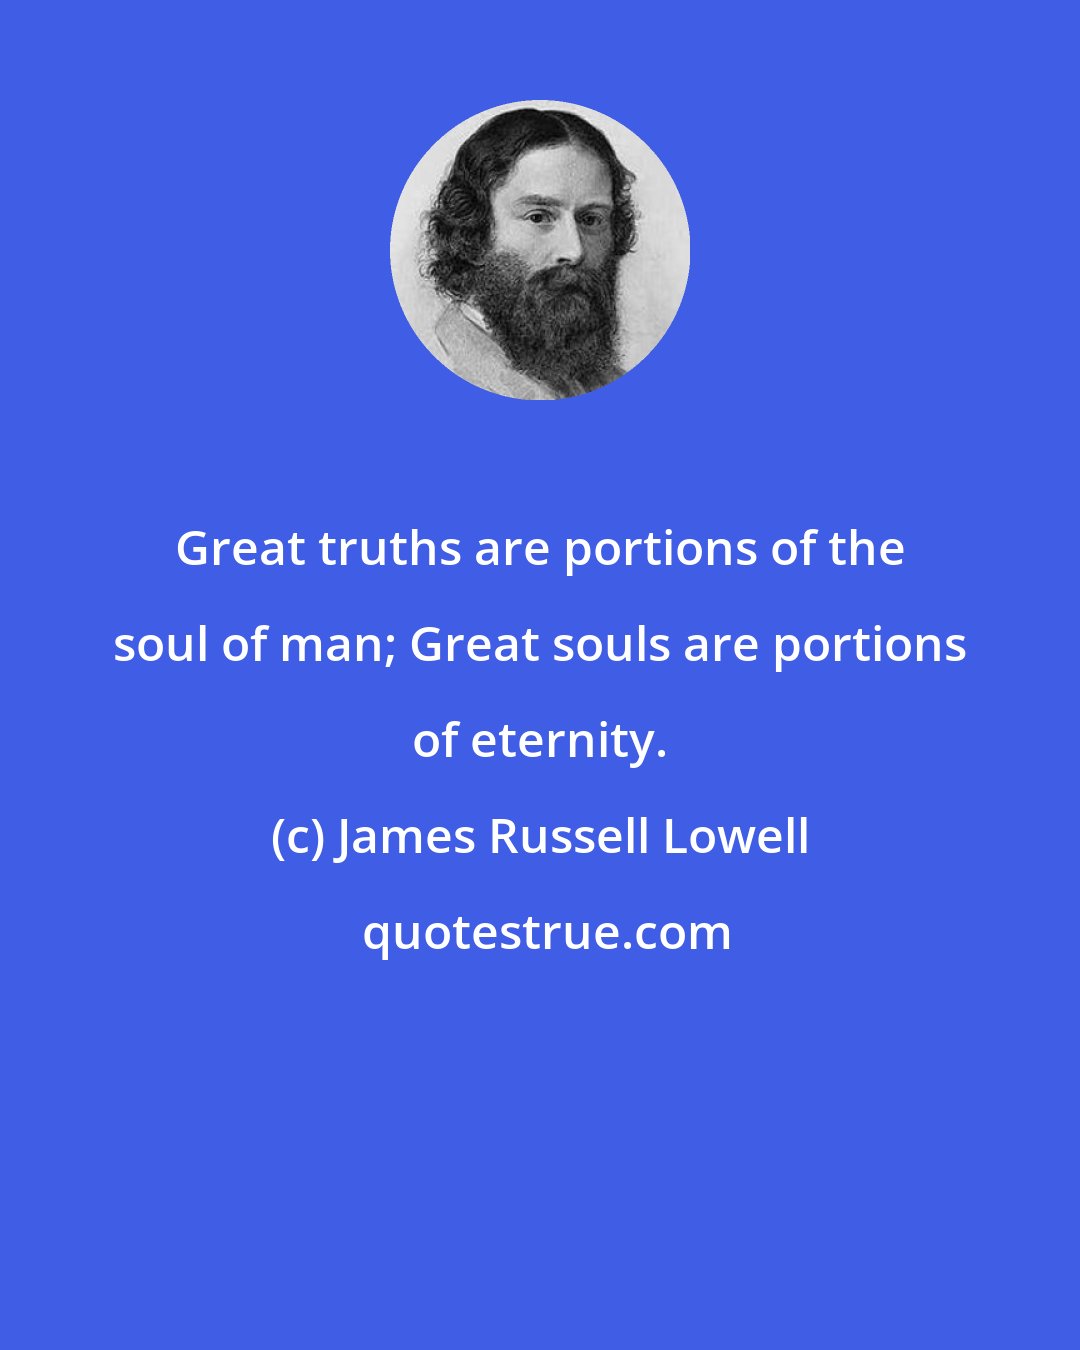 James Russell Lowell: Great truths are portions of the soul of man; Great souls are portions of eternity.